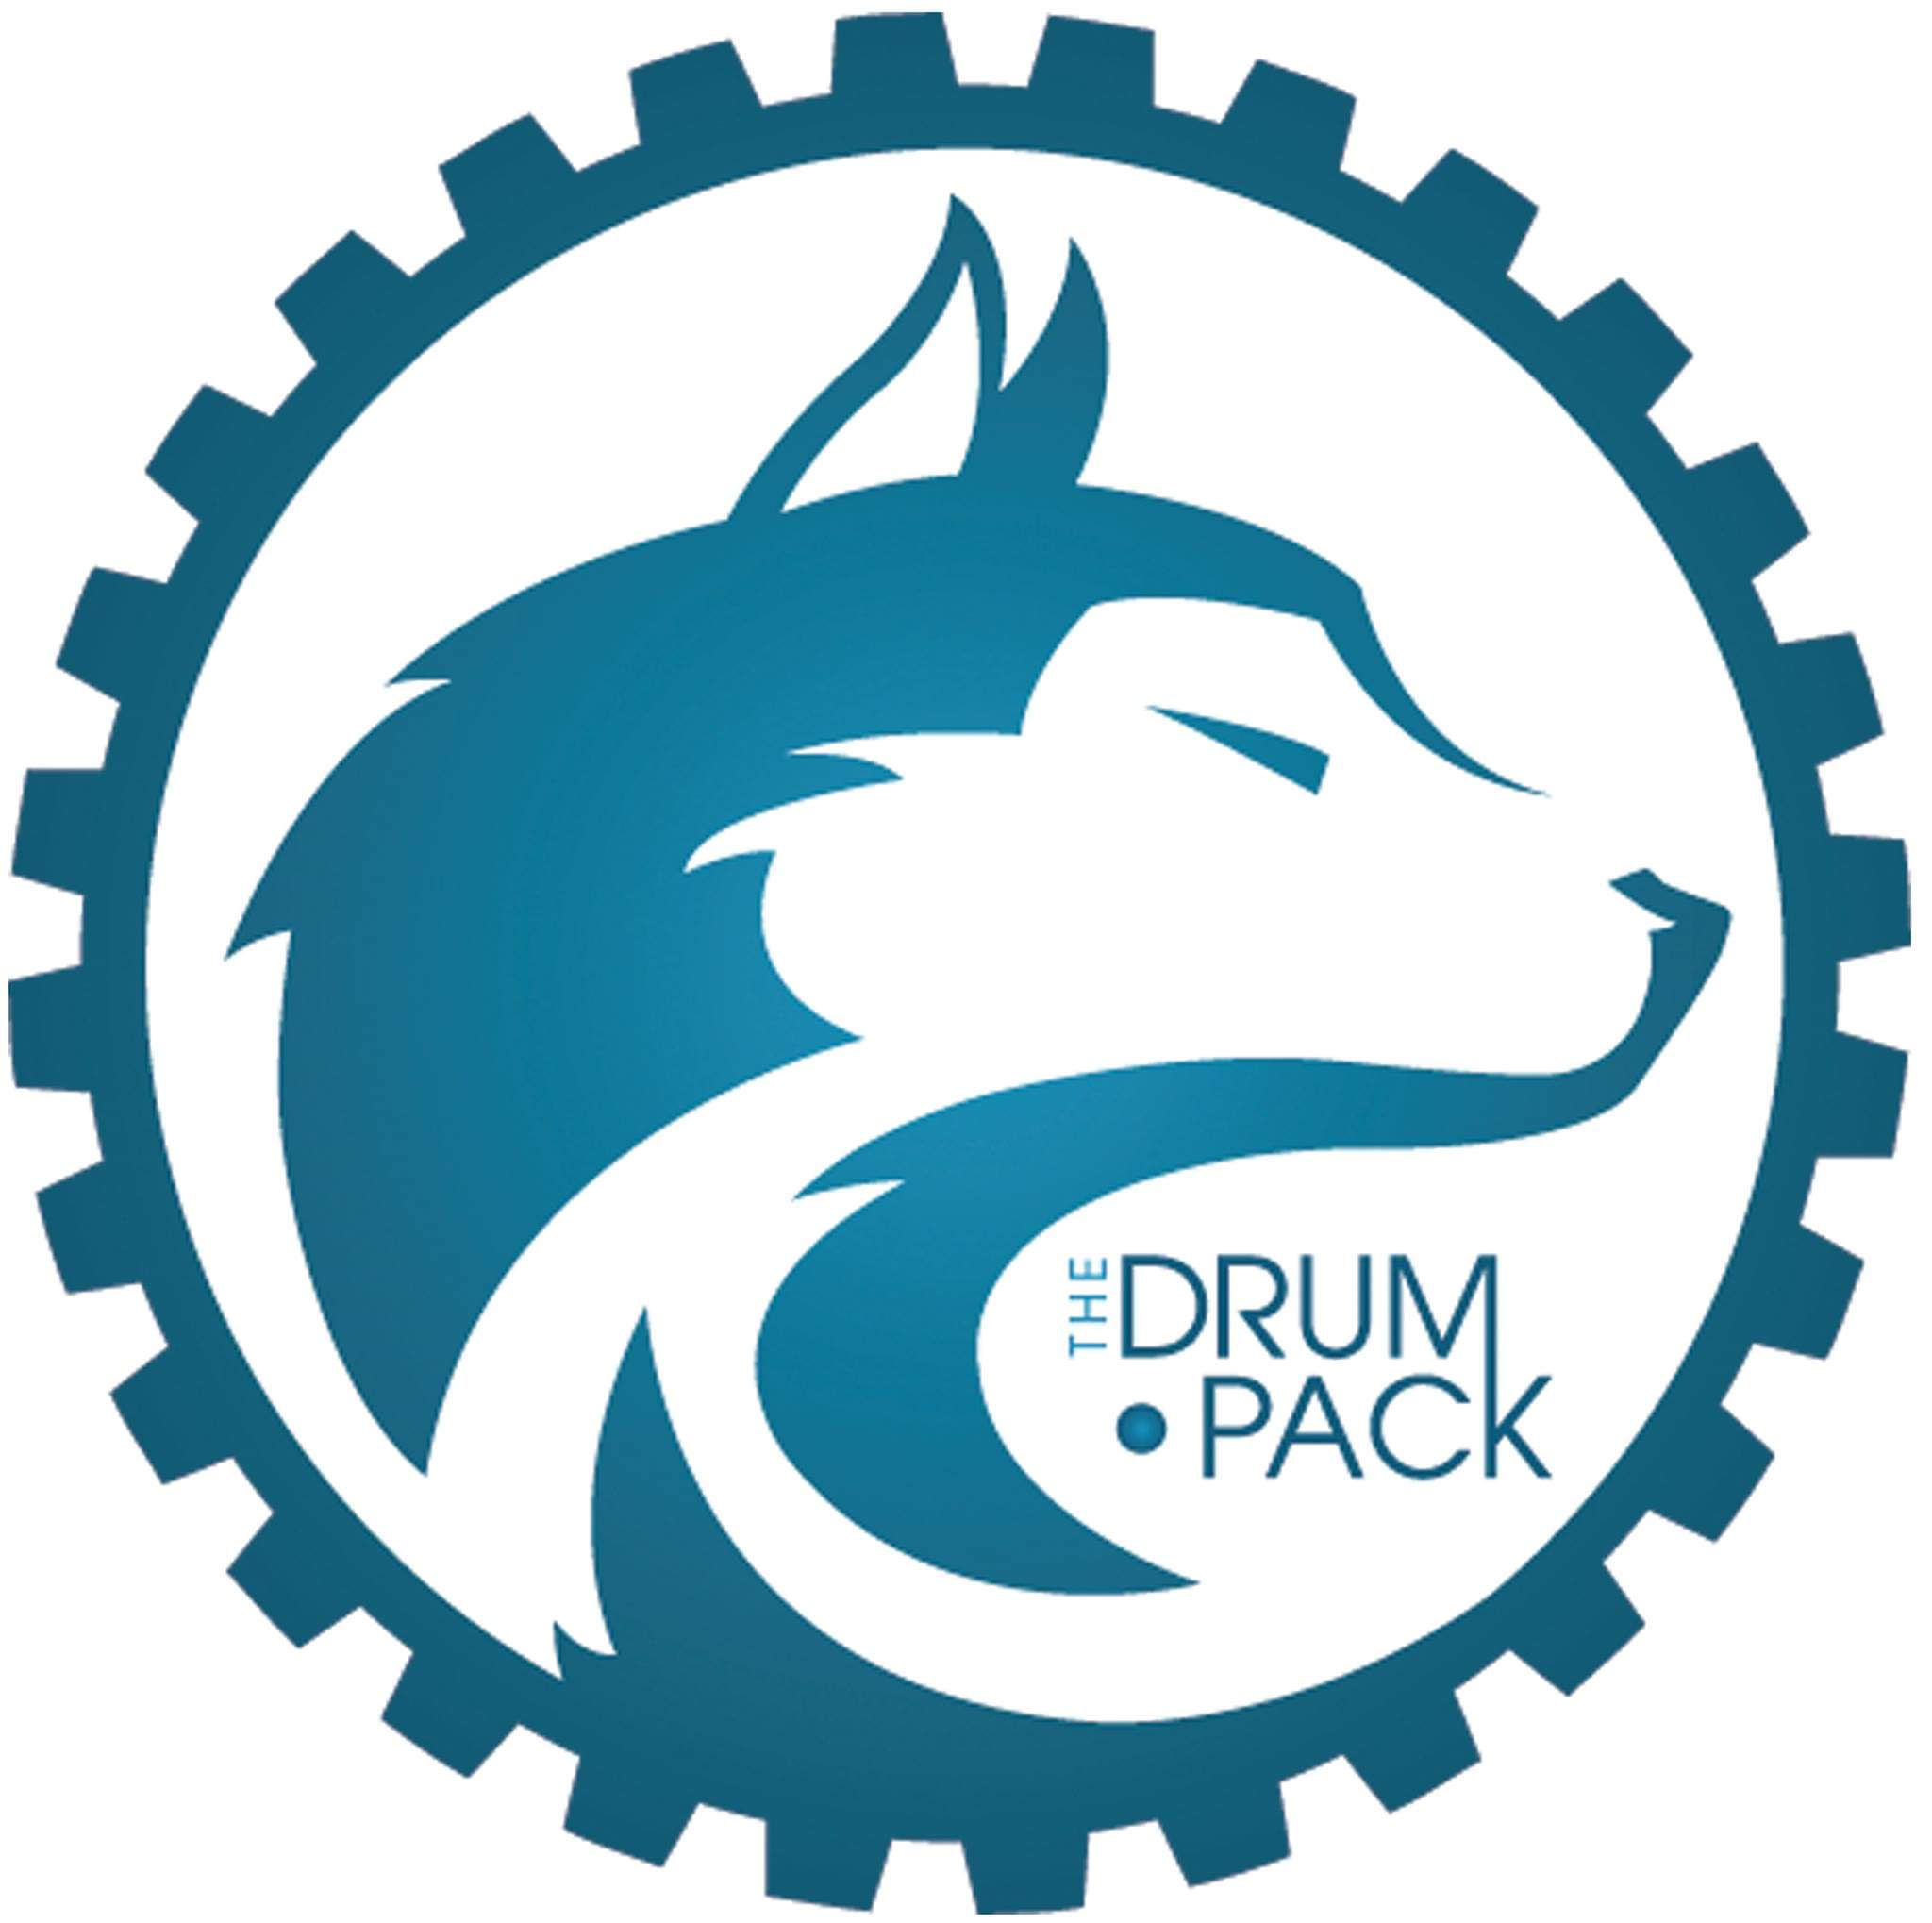 The Drum Pack